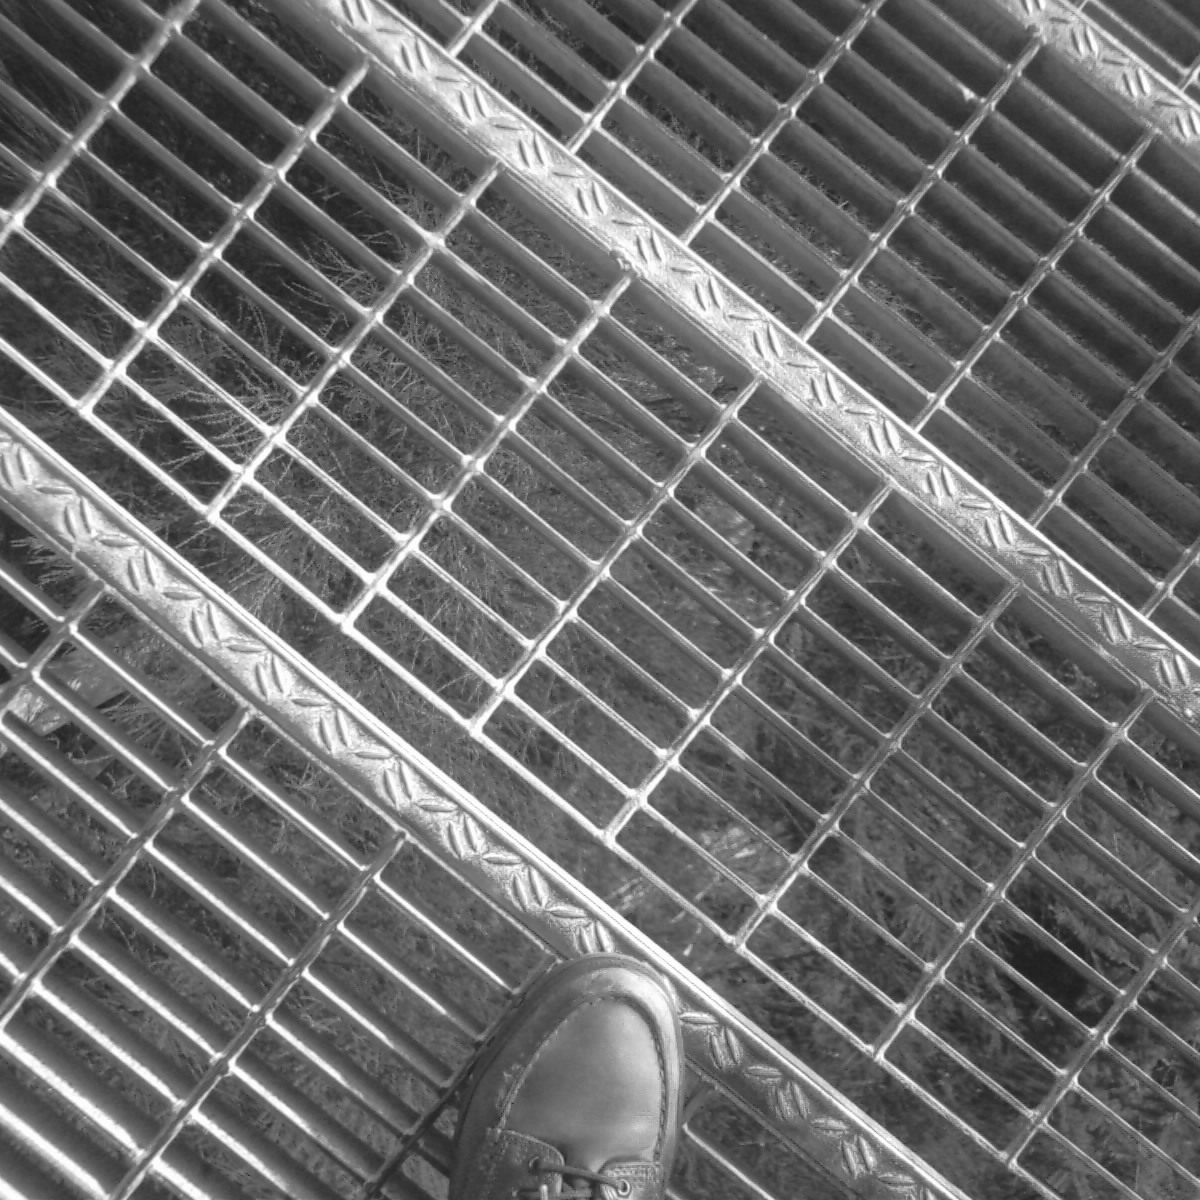 a person's shoes are placed near a large metal grate